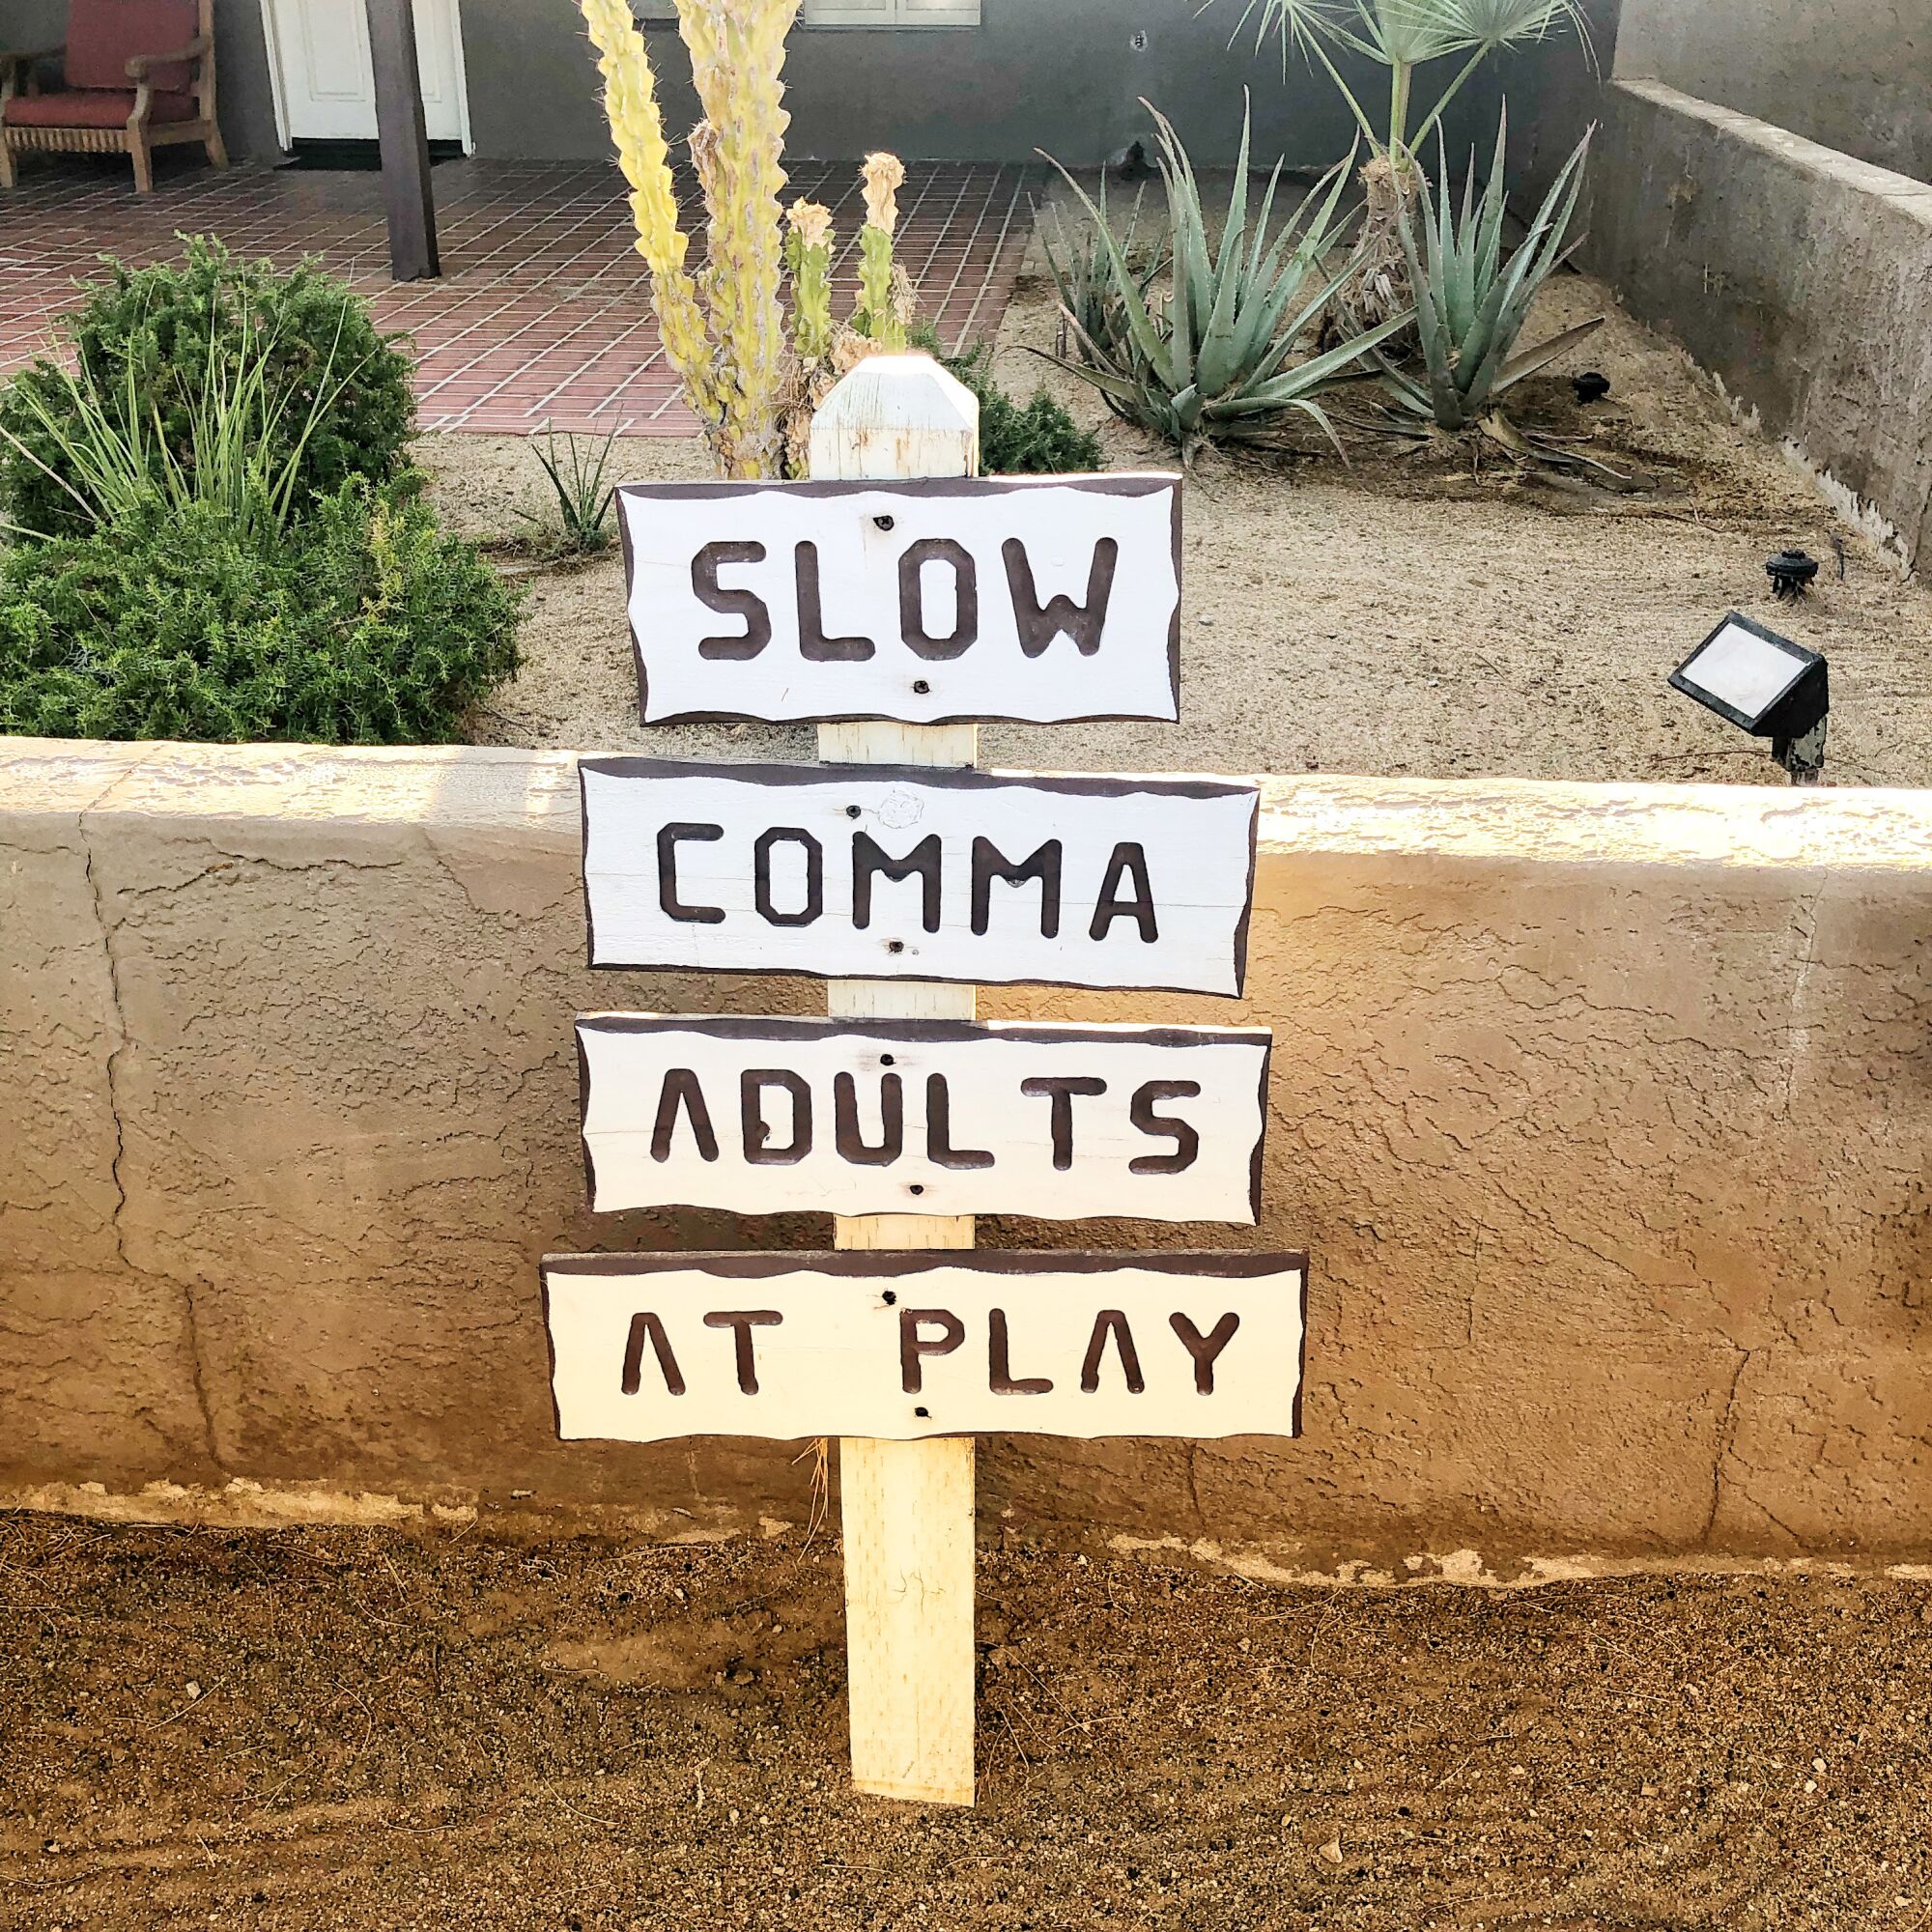 A sign reading "Slow comma adults at play"